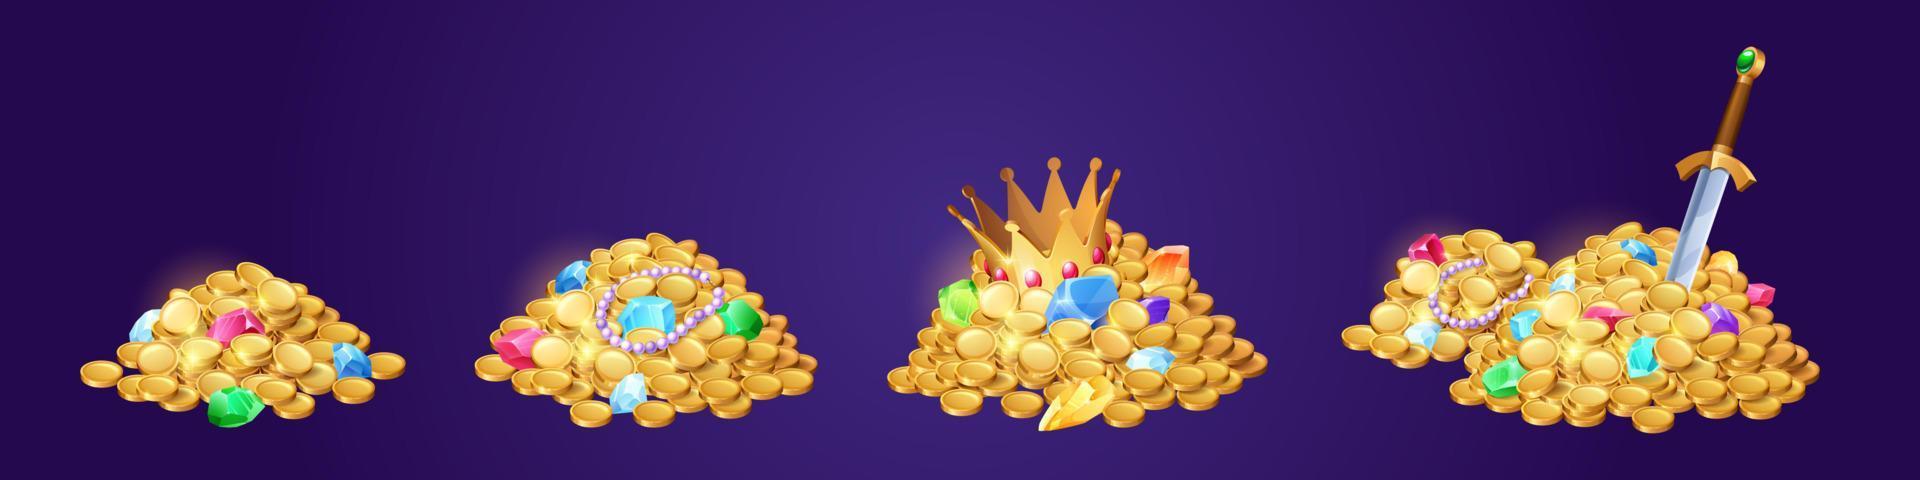 Gold coins heaps with gems and jewelry vector